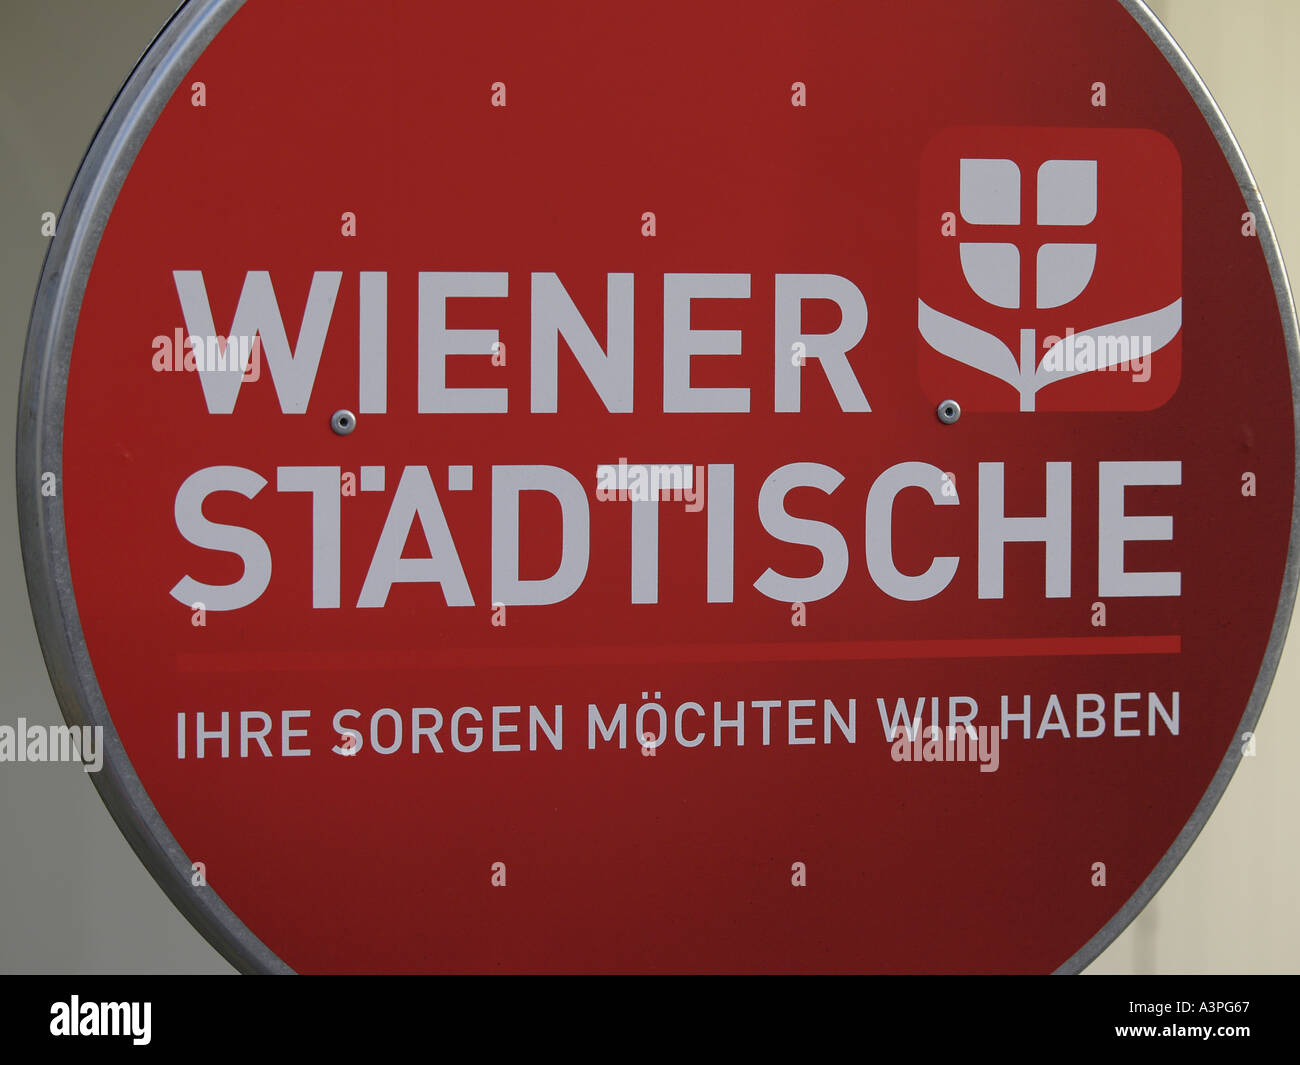 sign of insurance company Wiener Städtische slogan your sorrows we want to have Stock Photo